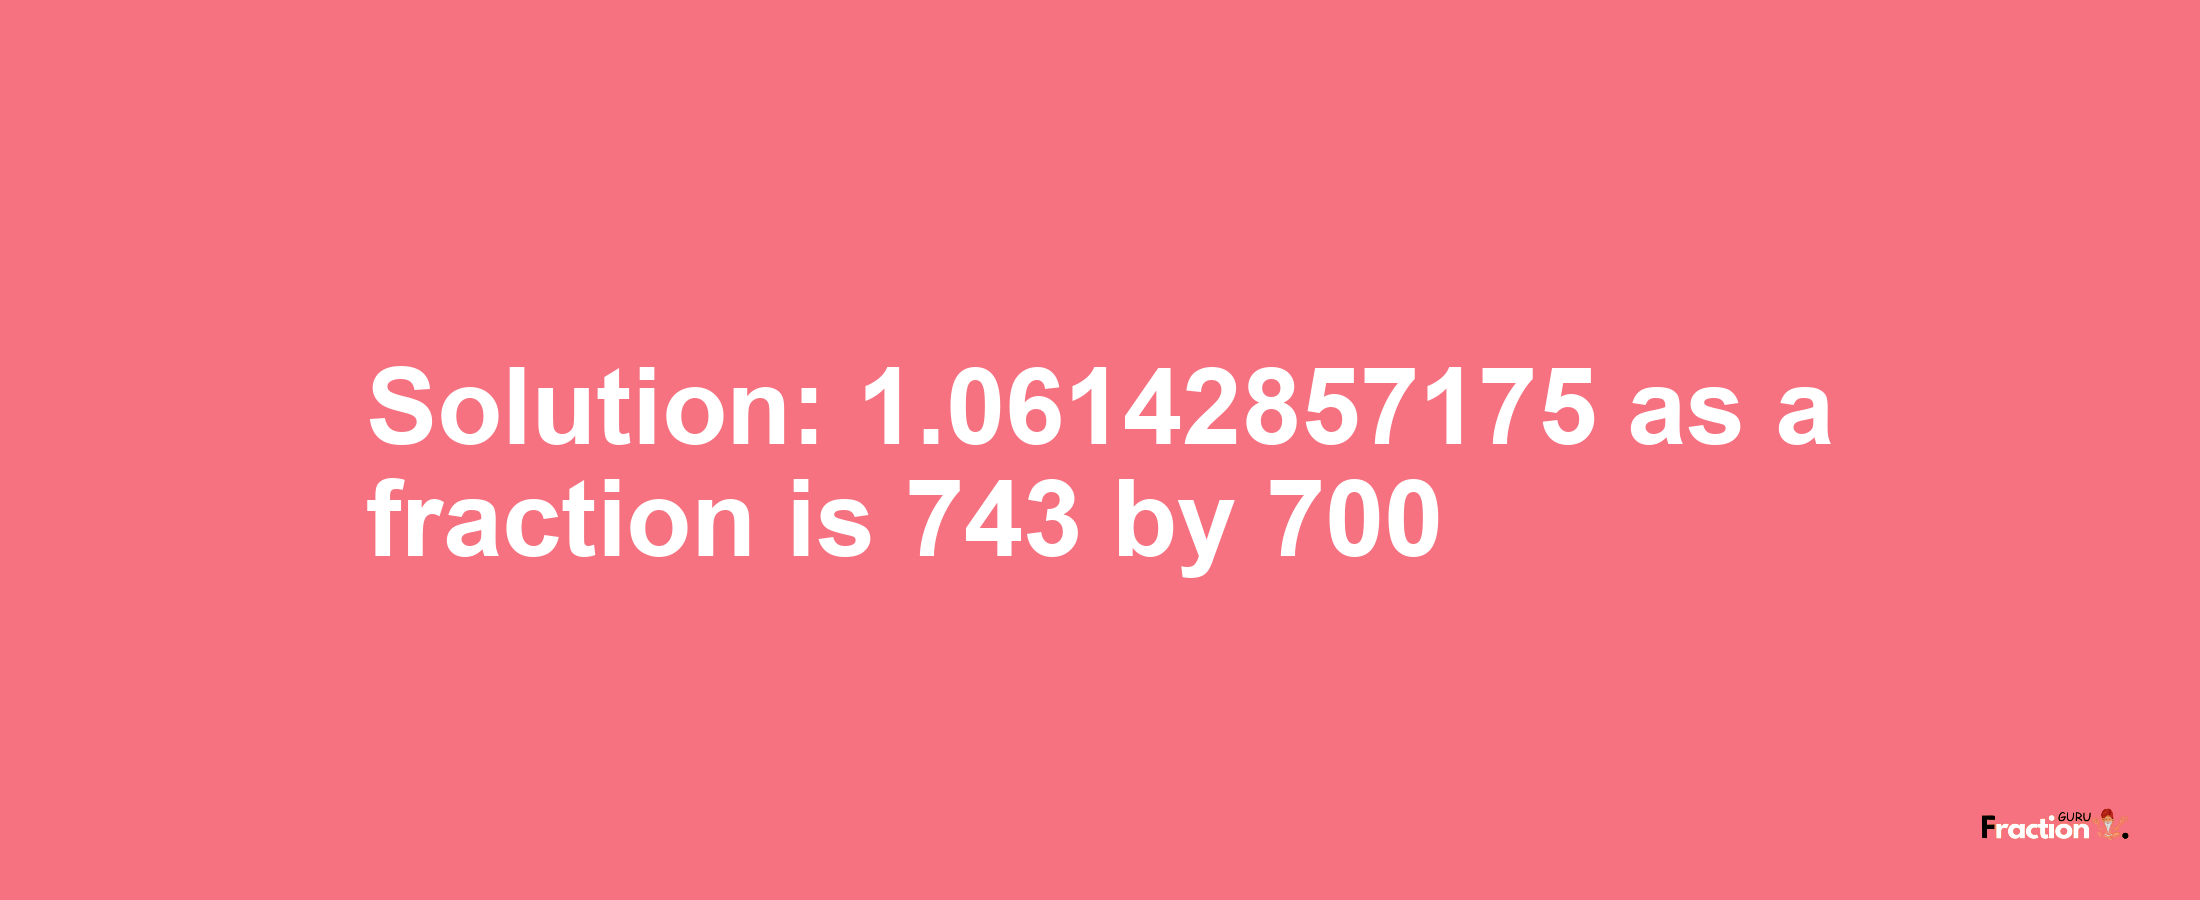 Solution:1.06142857175 as a fraction is 743/700